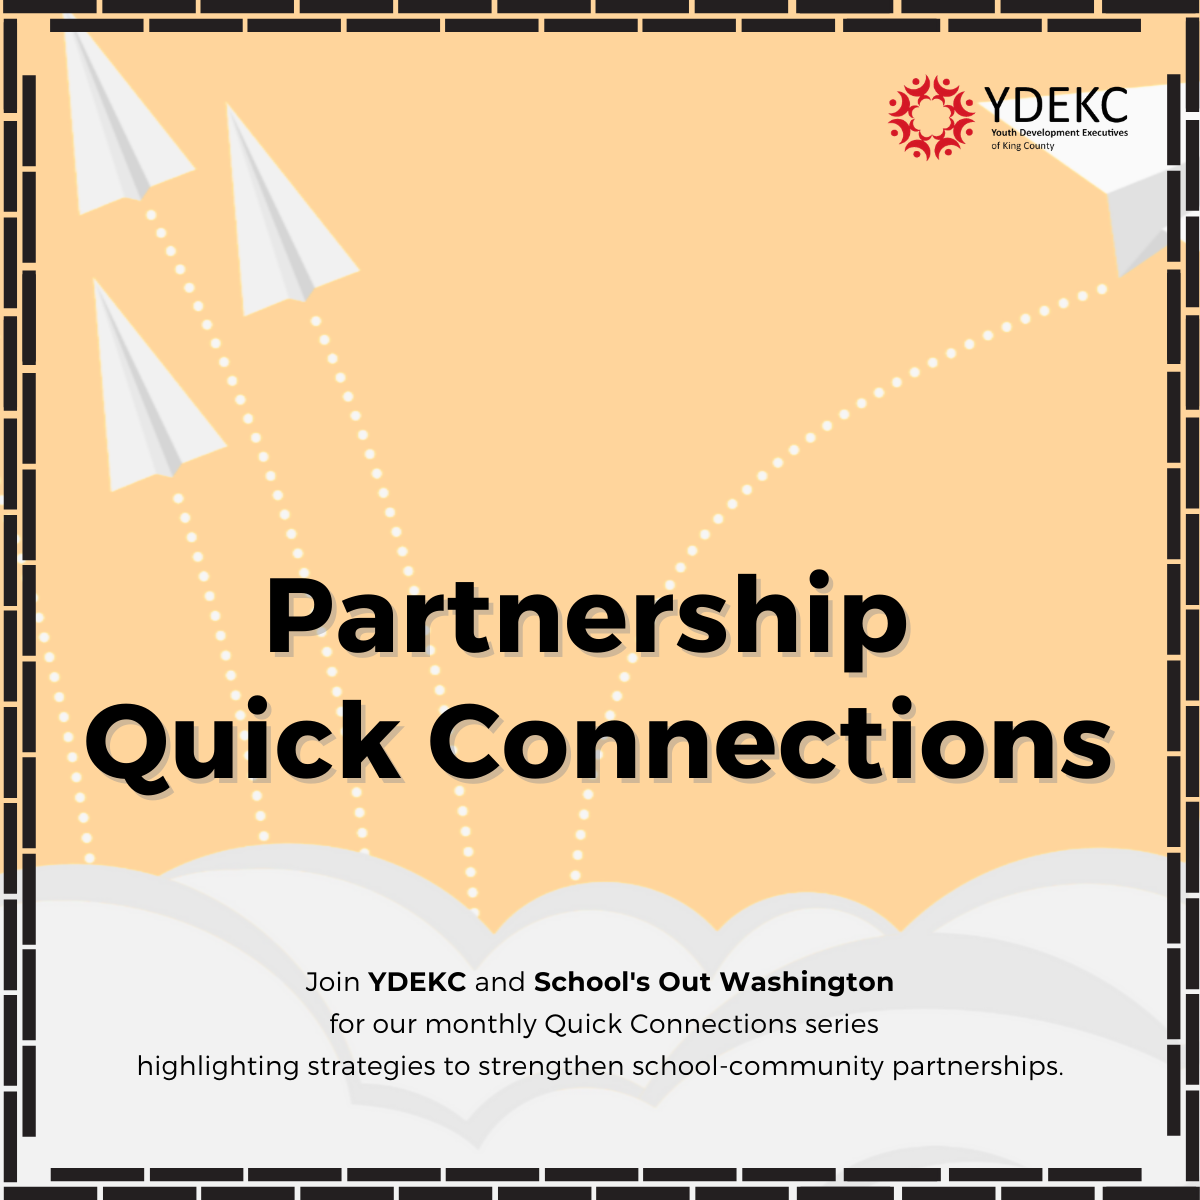 Partnership Quick Connections